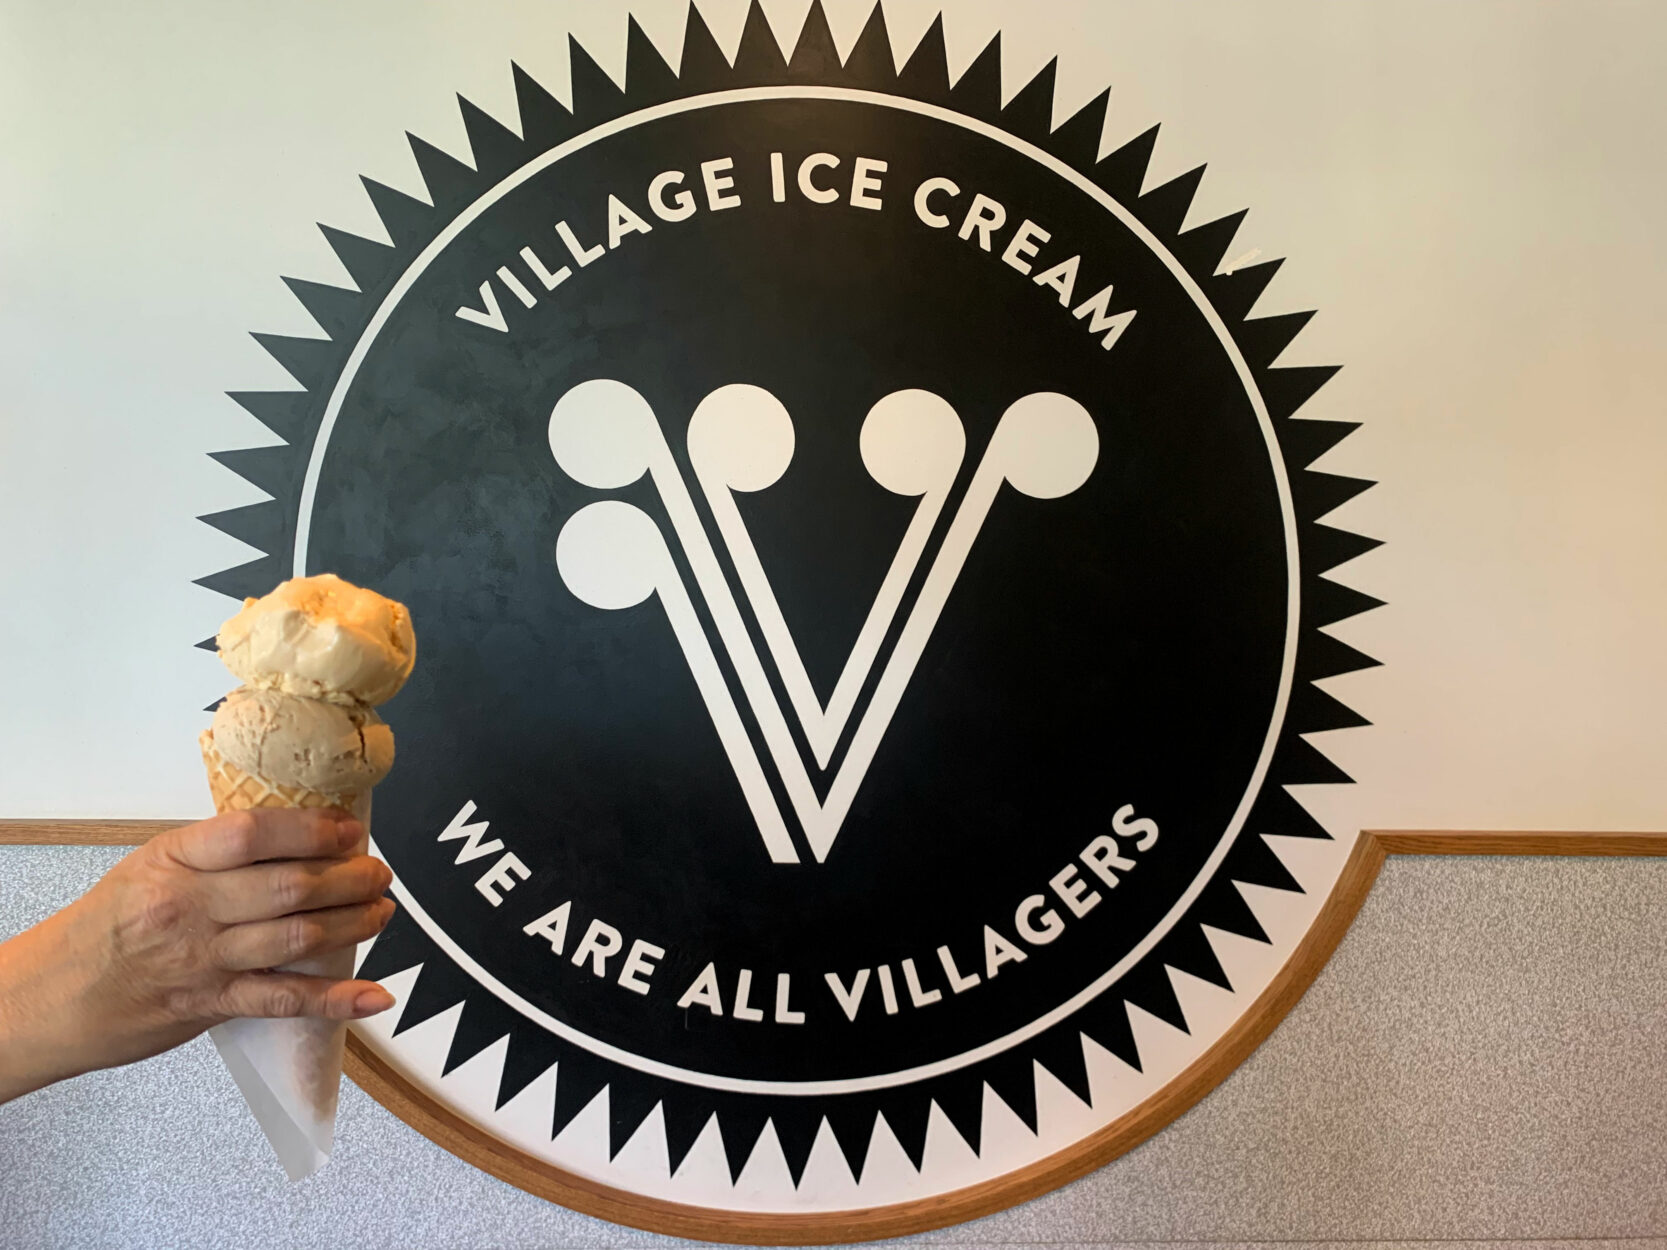 Keeping it Cool – Local Ice Cream Shops on Where Rockies